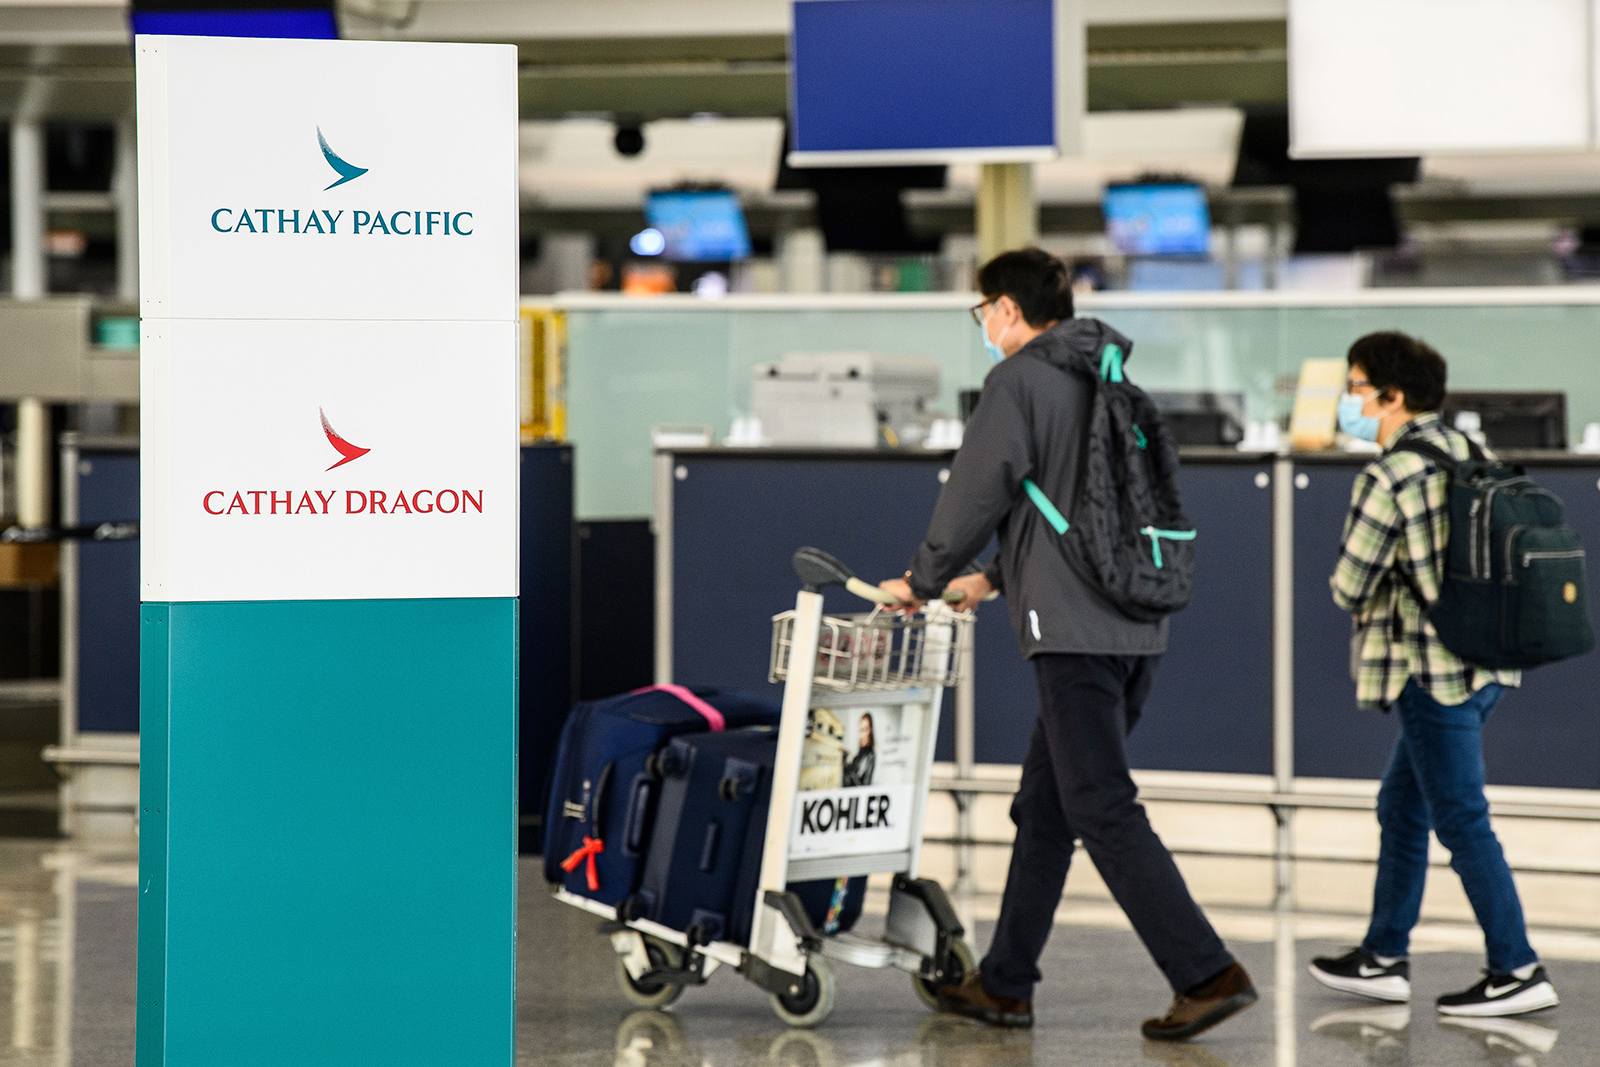 Passengers walk past signage for Cathay Pacific and Cathay Dragon near the city's flagship carrier check-in counters at Hong Kong International Airport, on October 20.